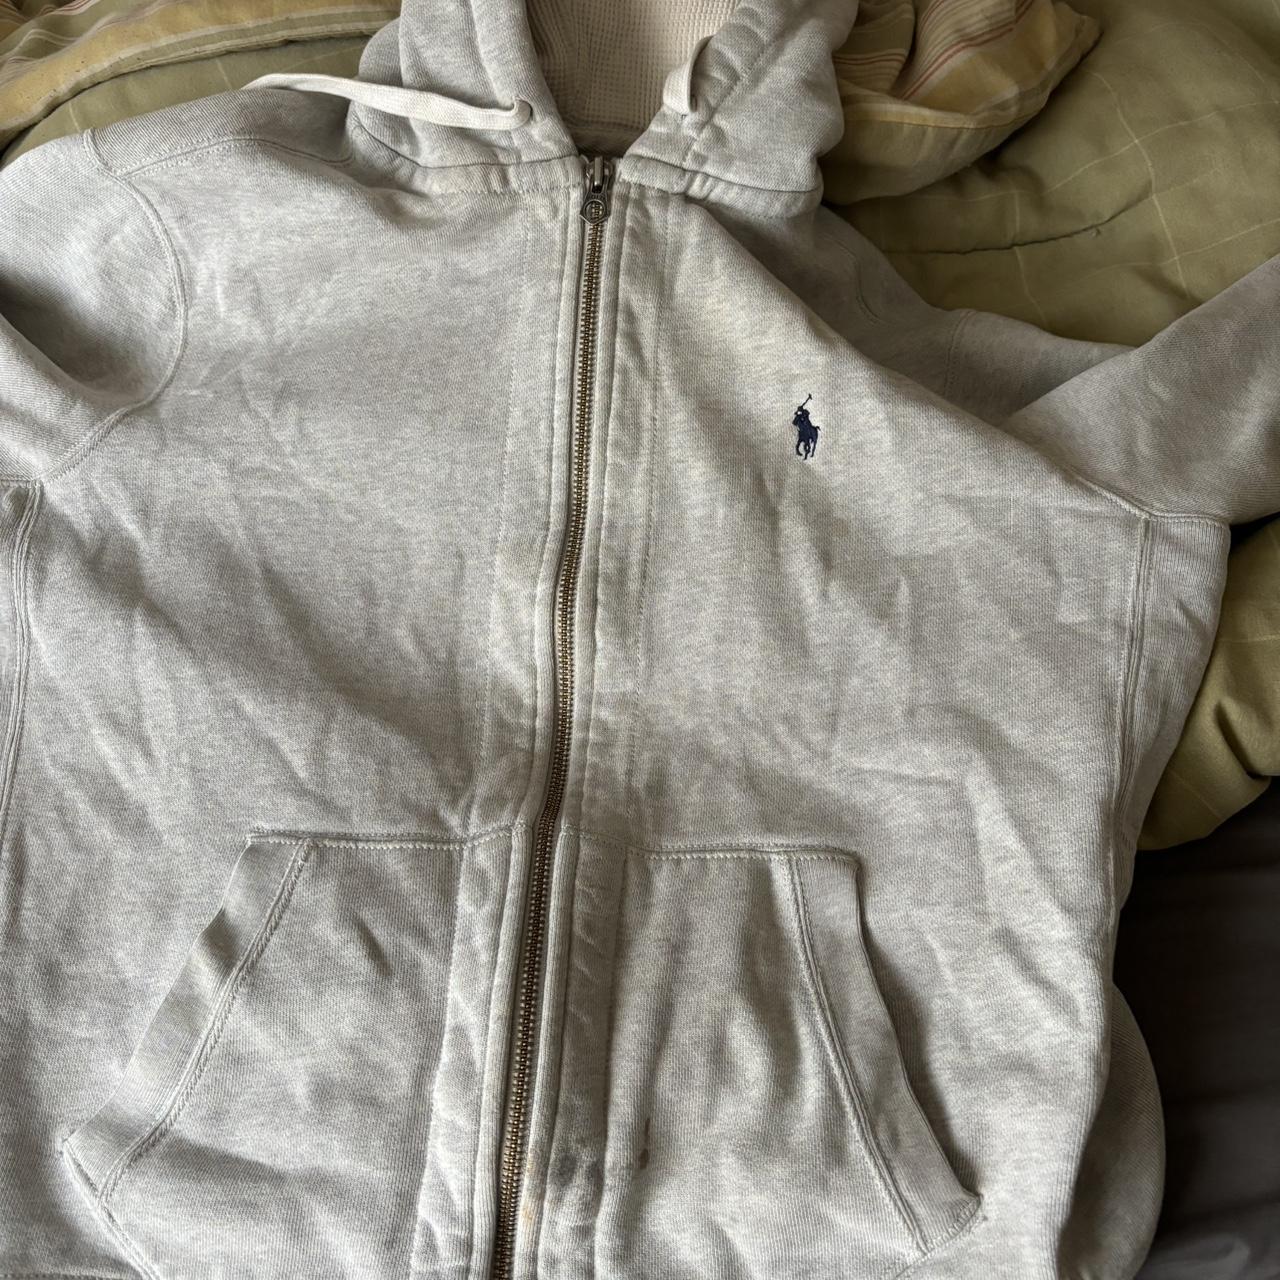 Tiny stain at the bottom - Depop